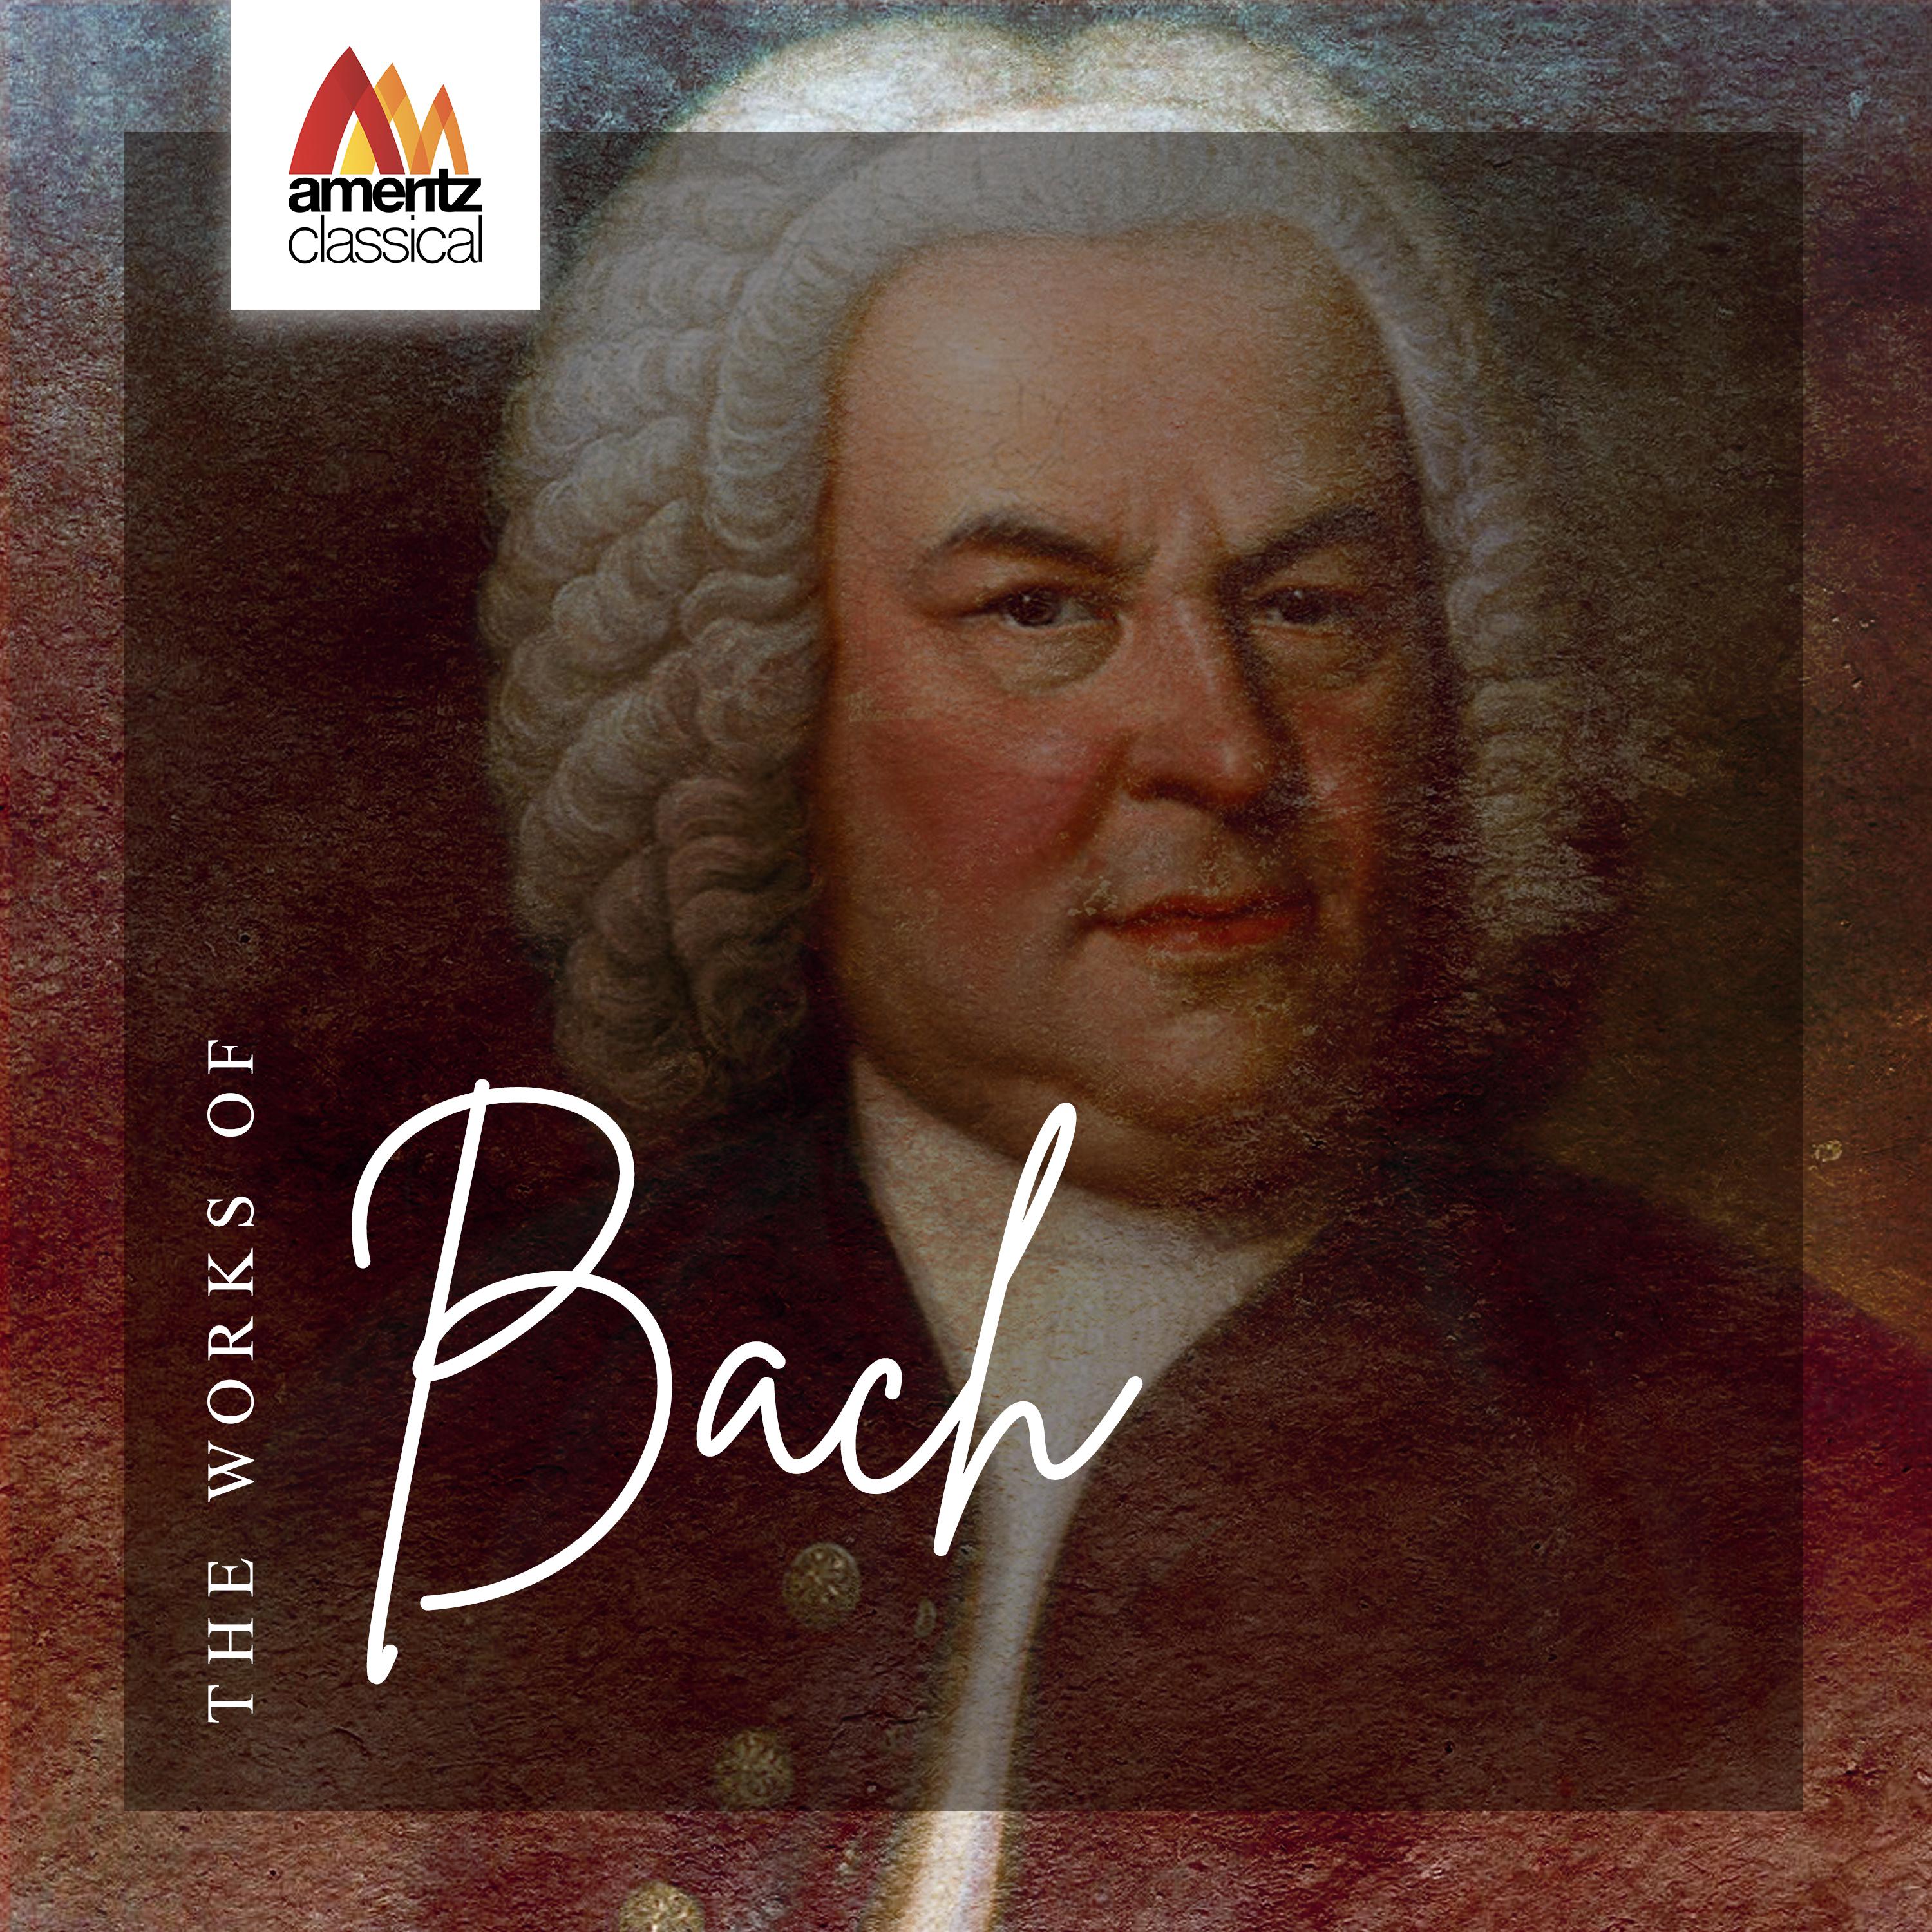 The Works of Bach